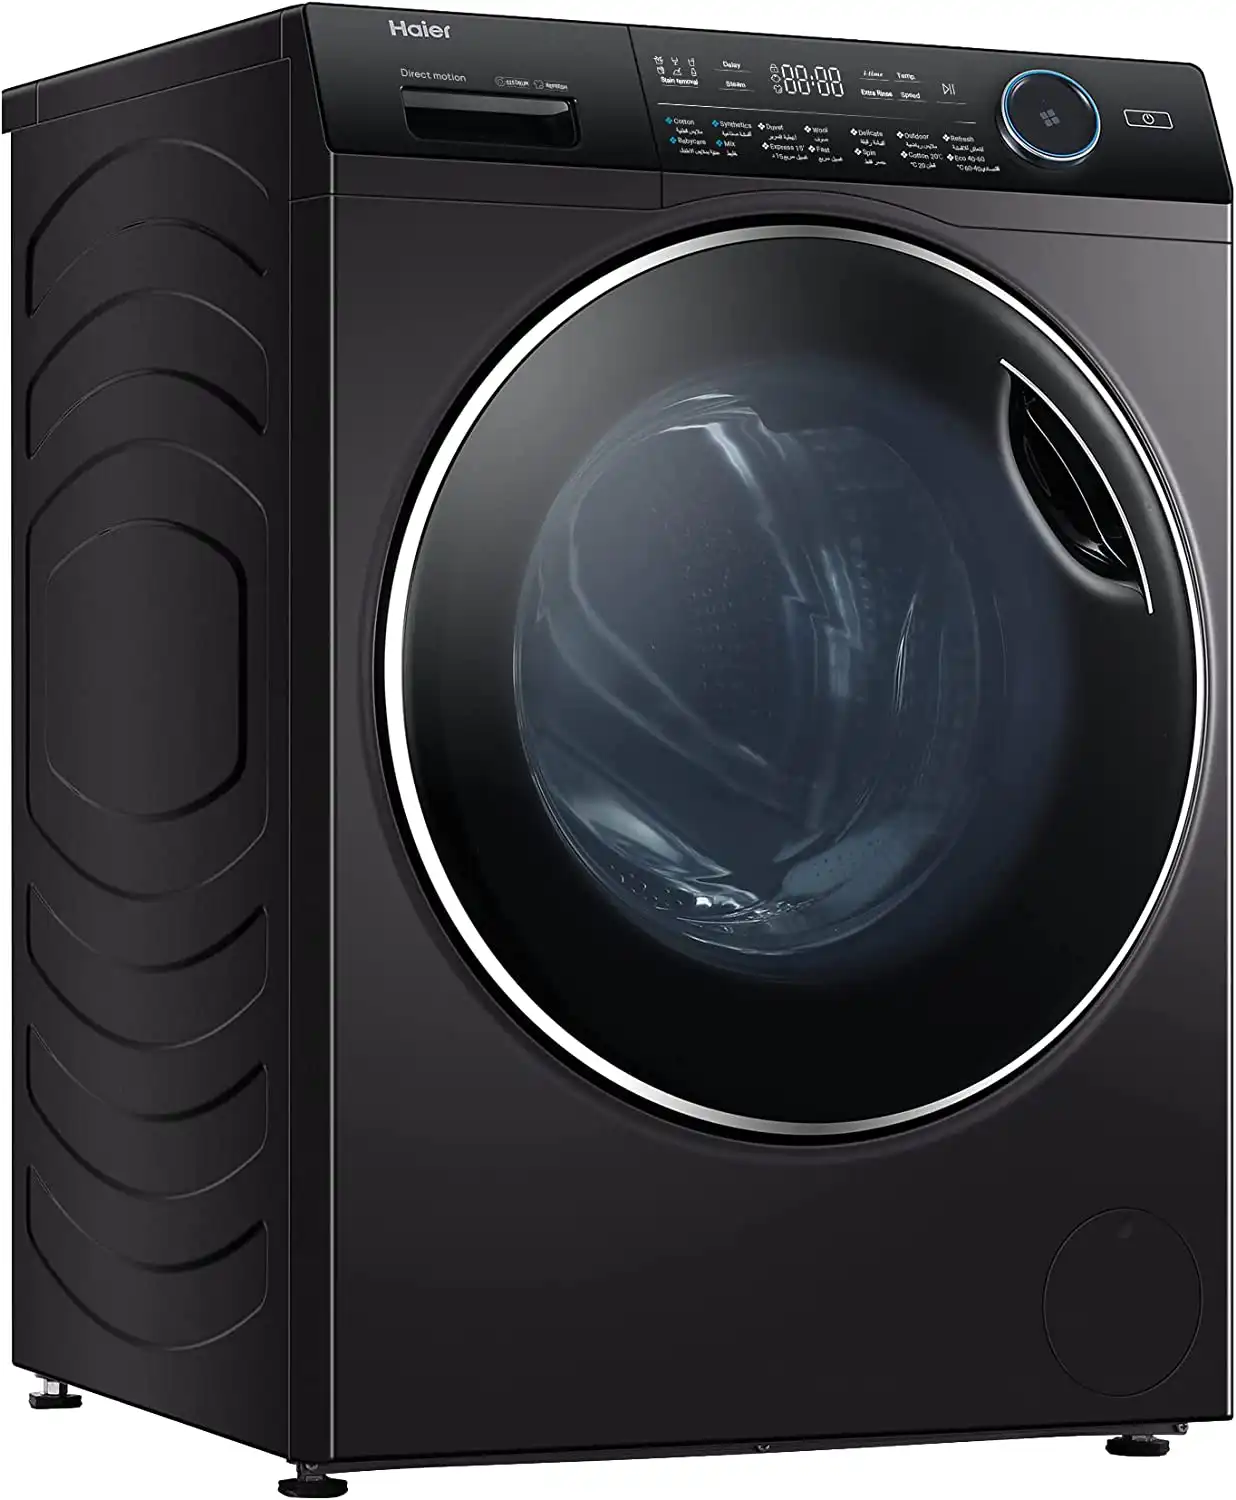 Haier Fully Automatic Washing Machine, Front Loading, 12 KG, Inverter, Steam, Silver with Black Frame, HW120-B14979S8